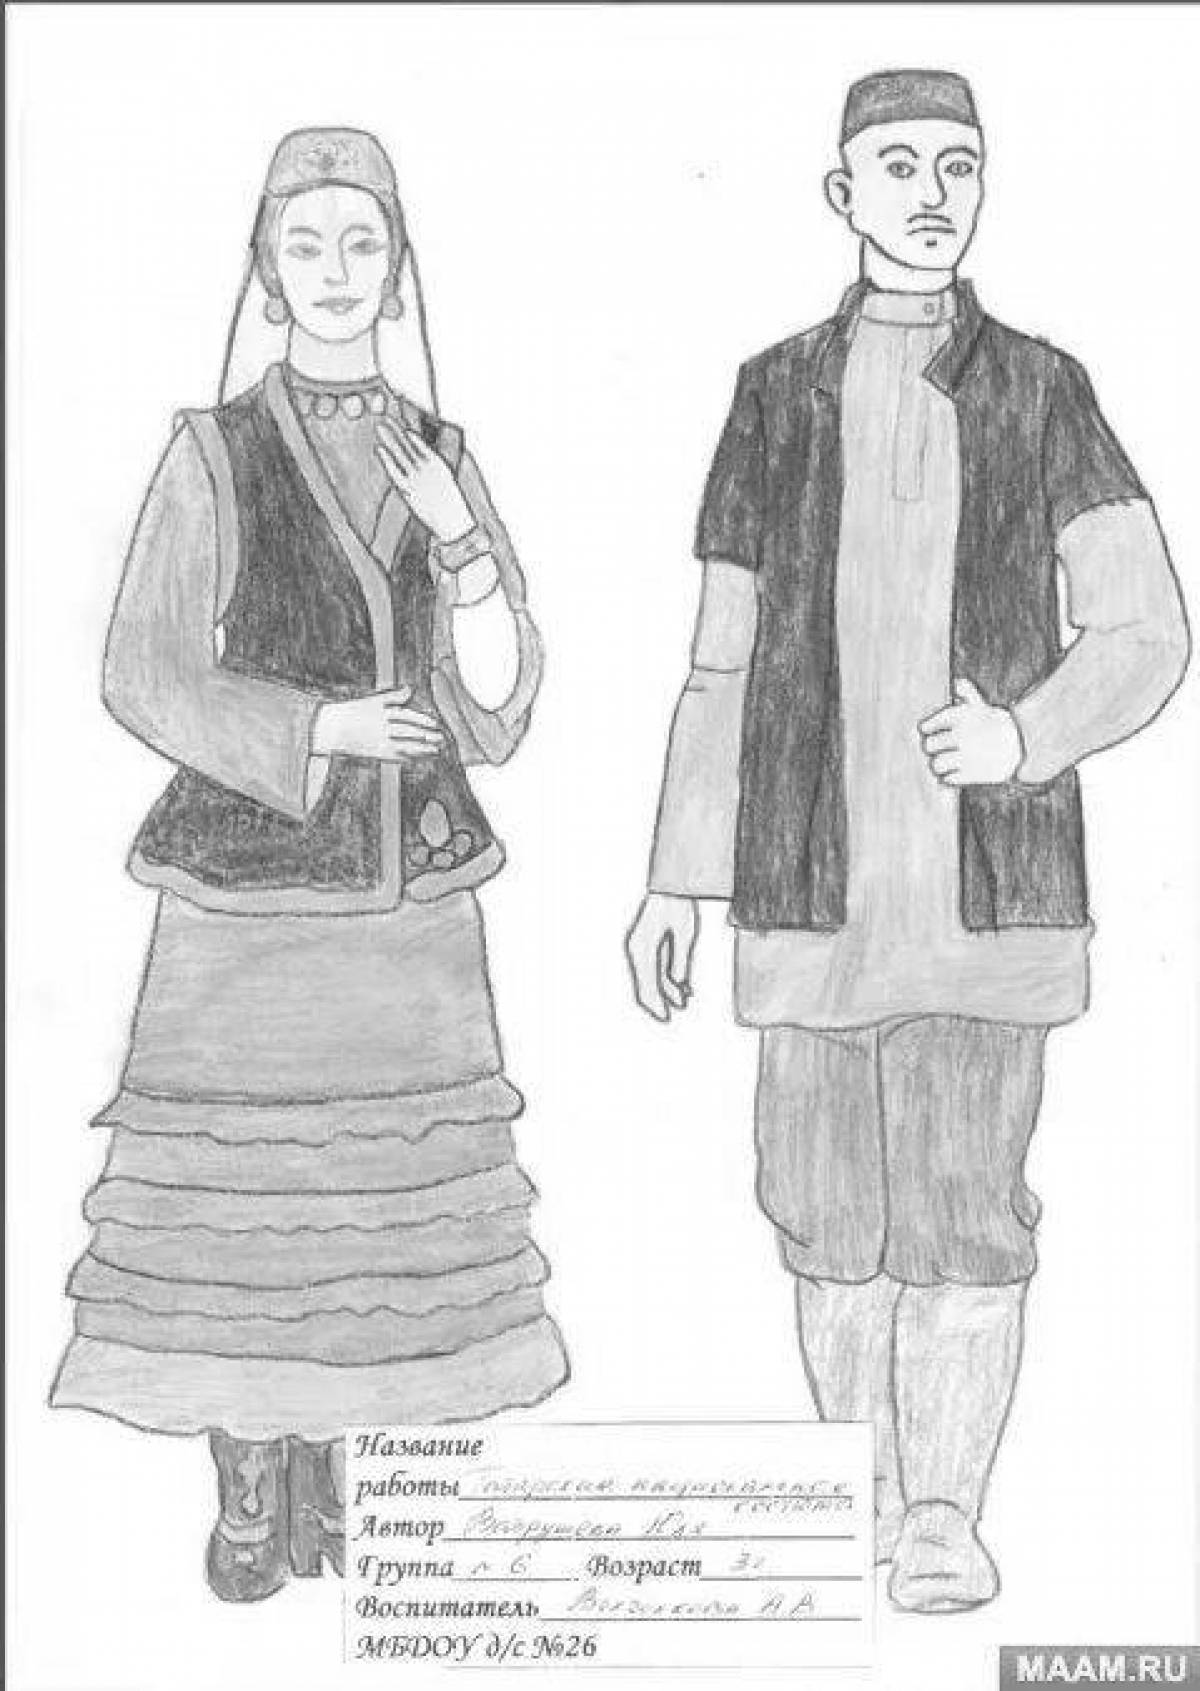 Coloring of the timeless Tatar costume